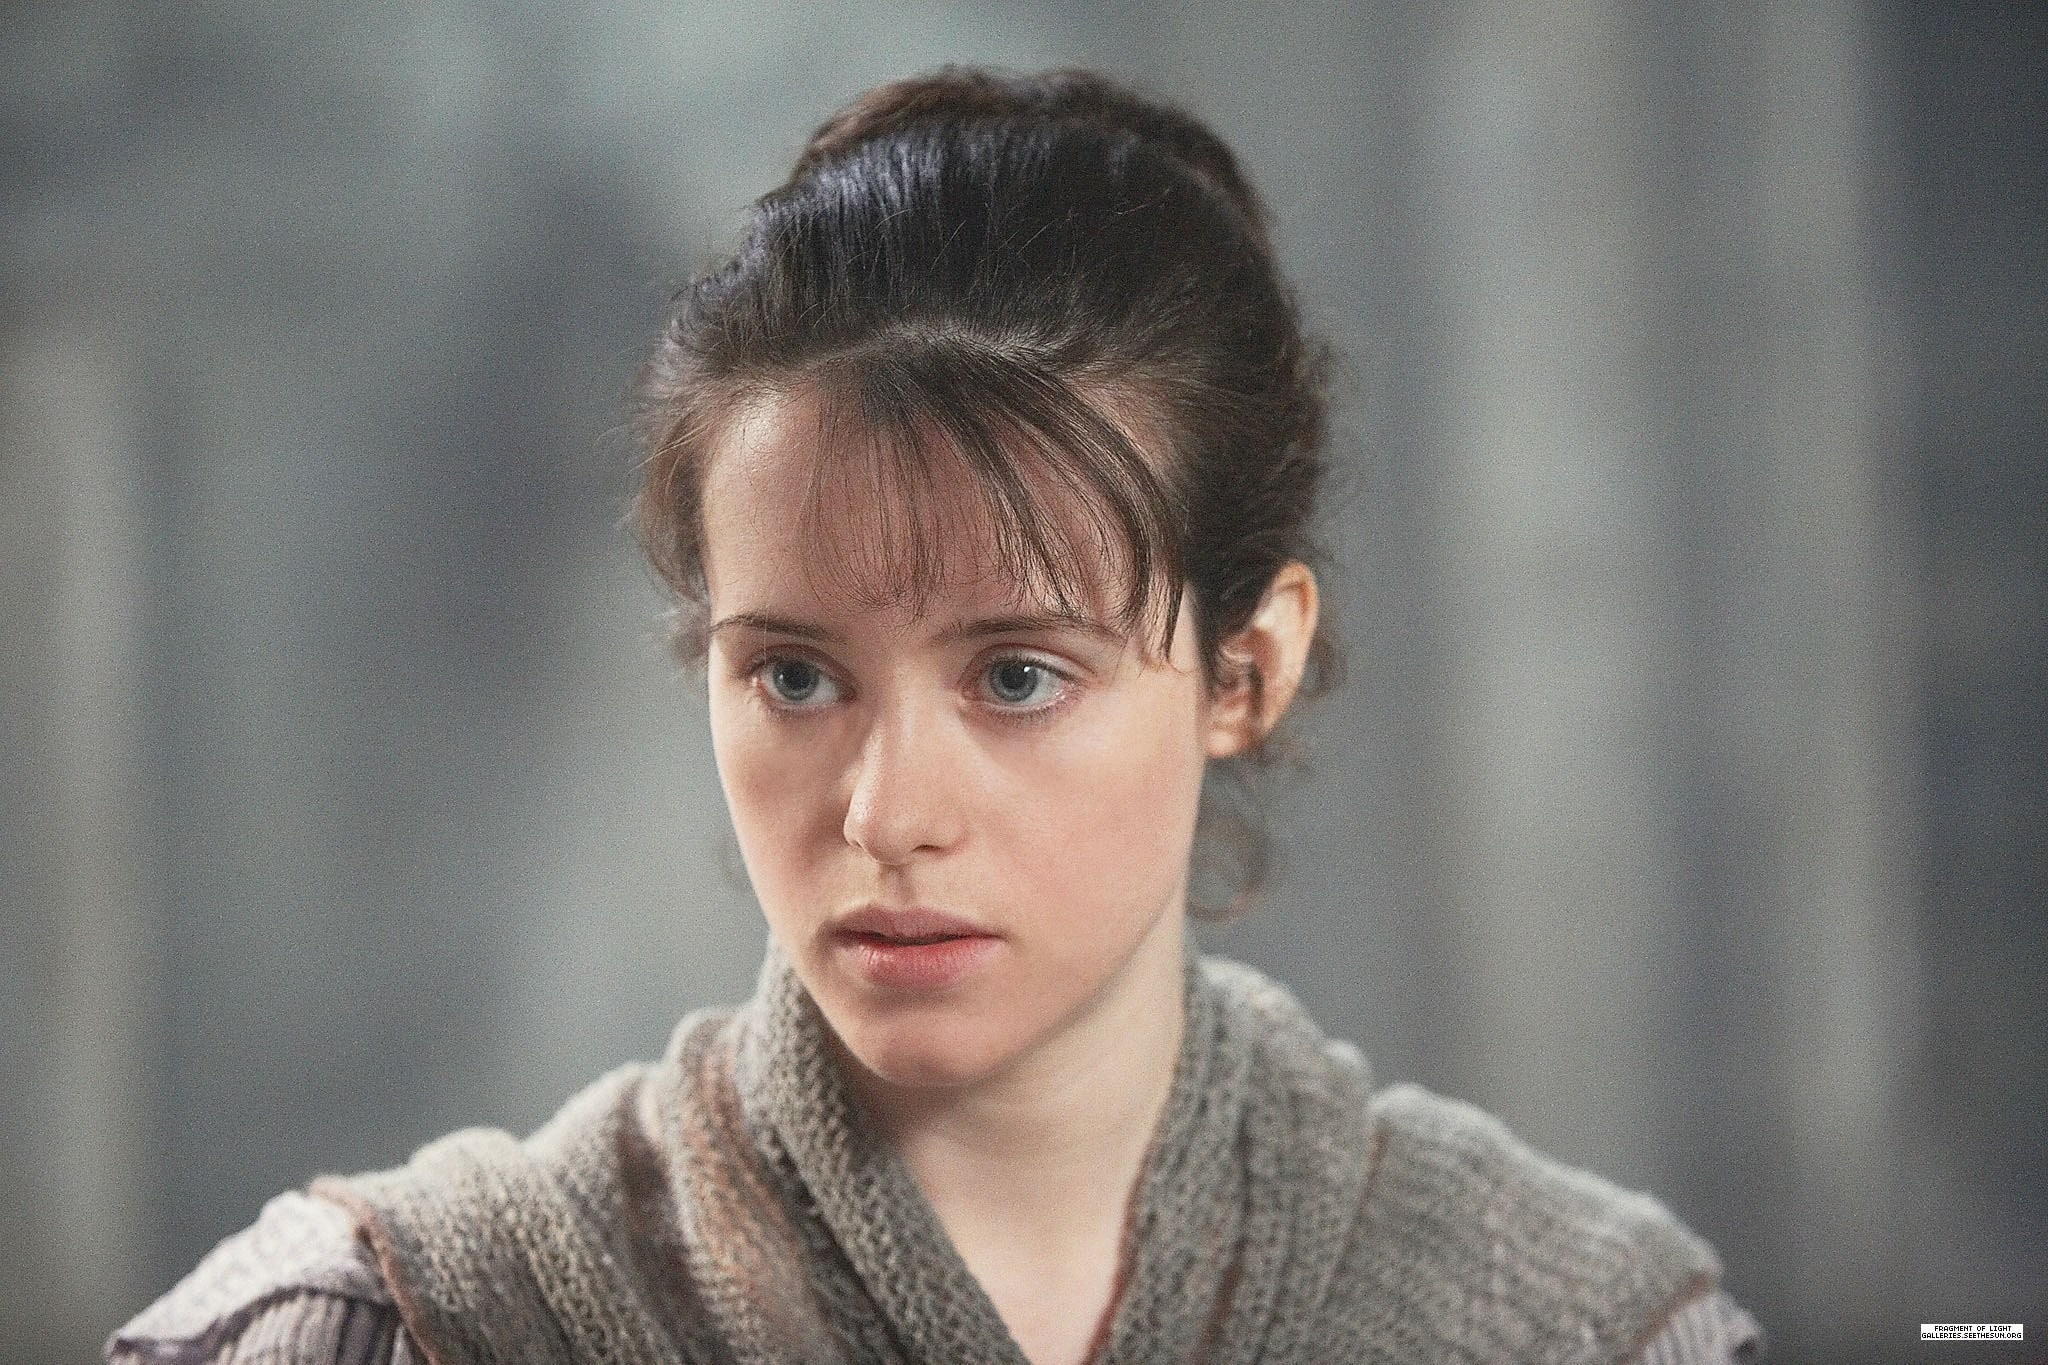 women, Claire Foy, blue eyes, actress, British